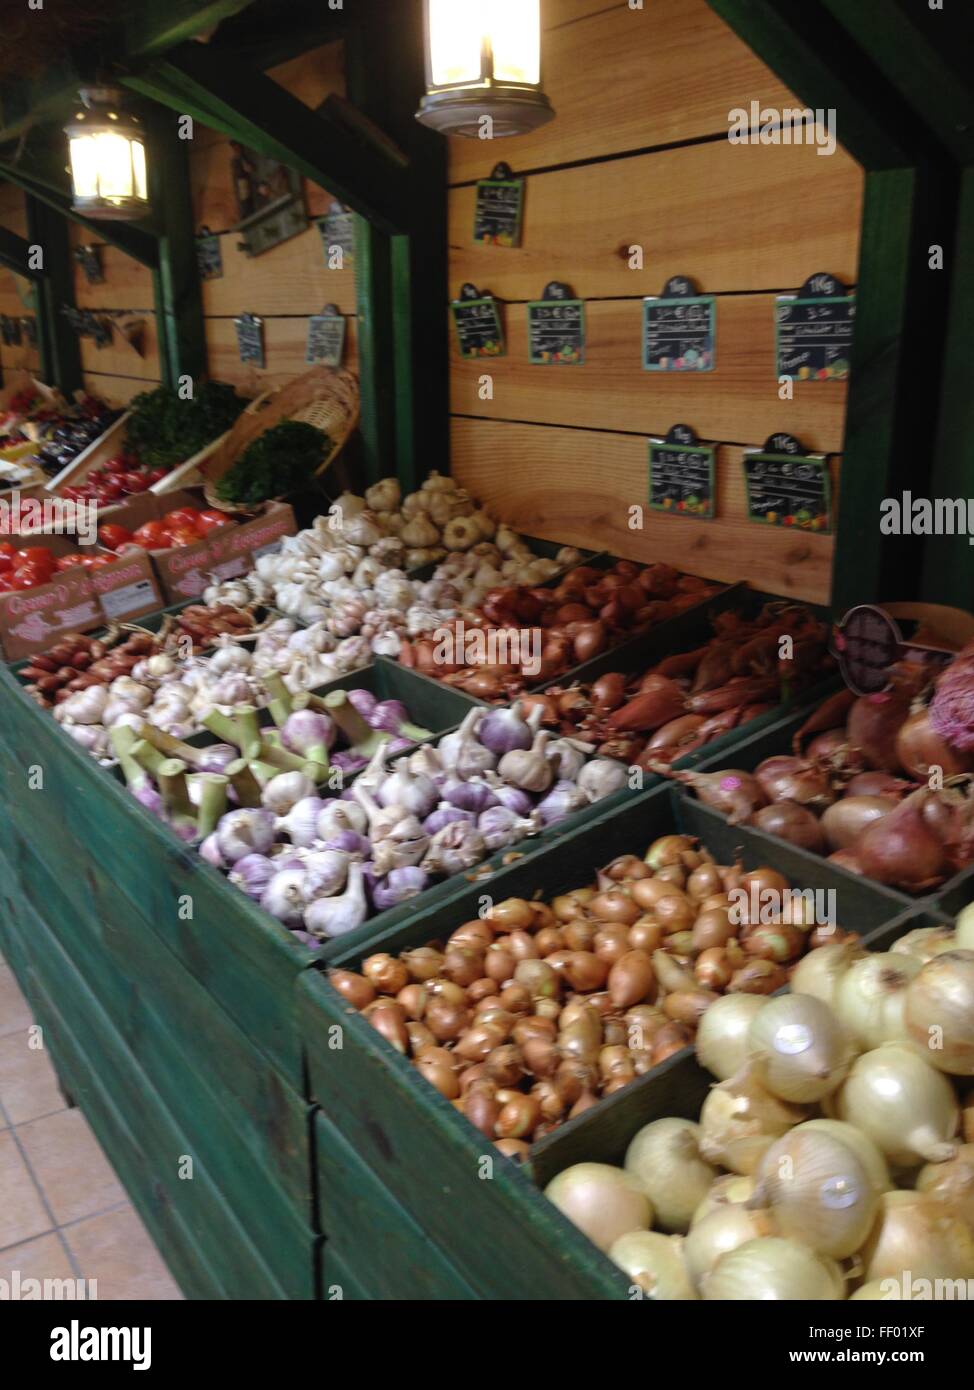 Amazing onion display in a country shop Stock Photo